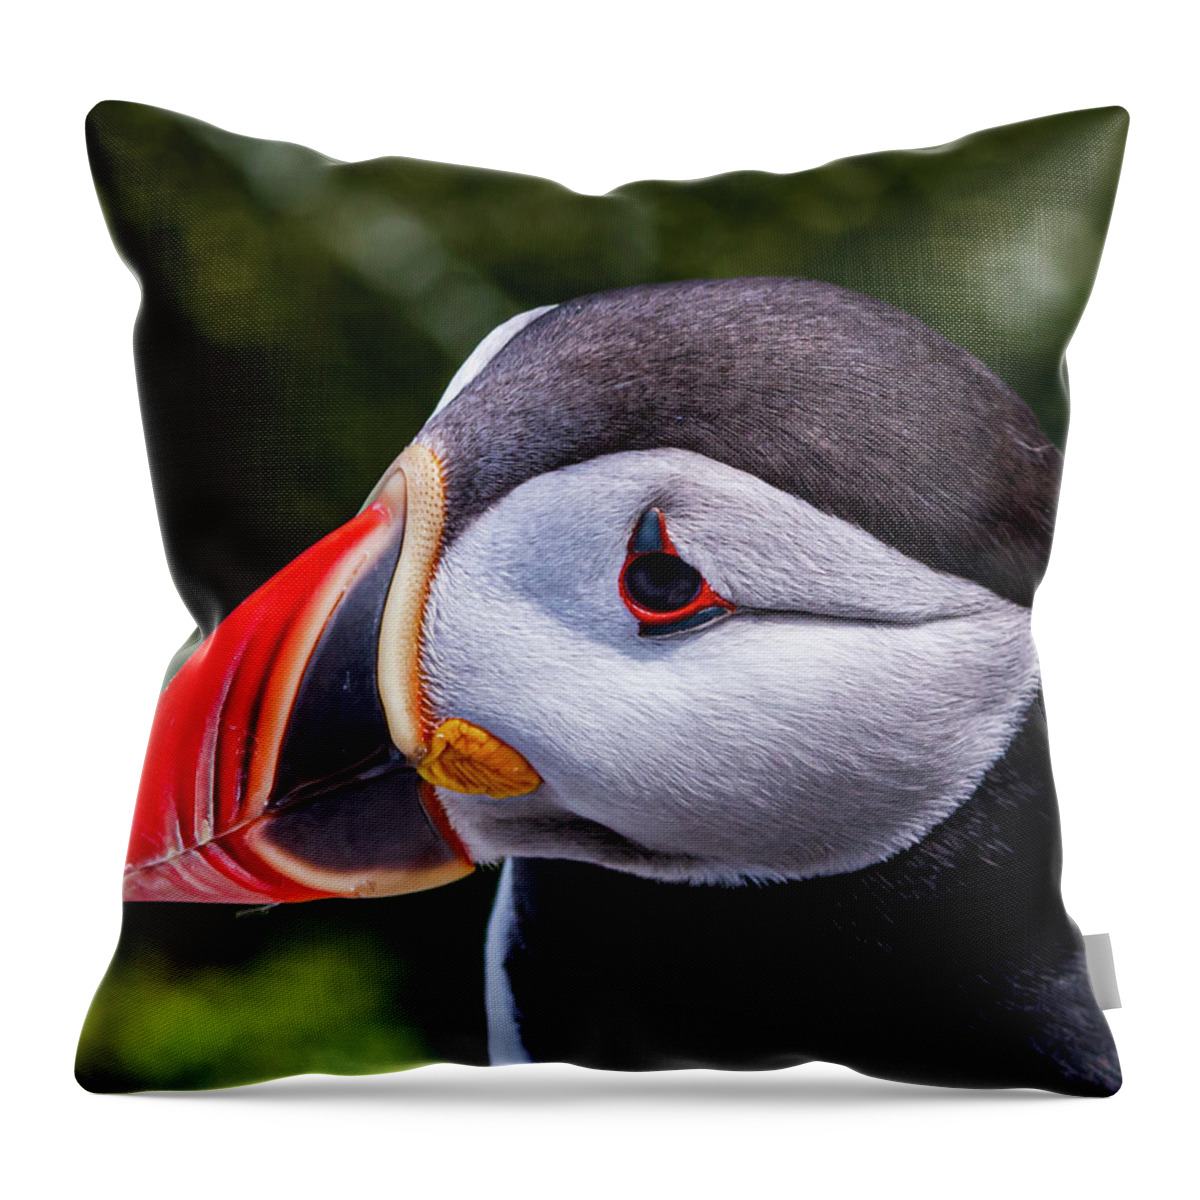 Puffins Throw Pillow featuring the photograph Puffin Profile by Scene by Dewey